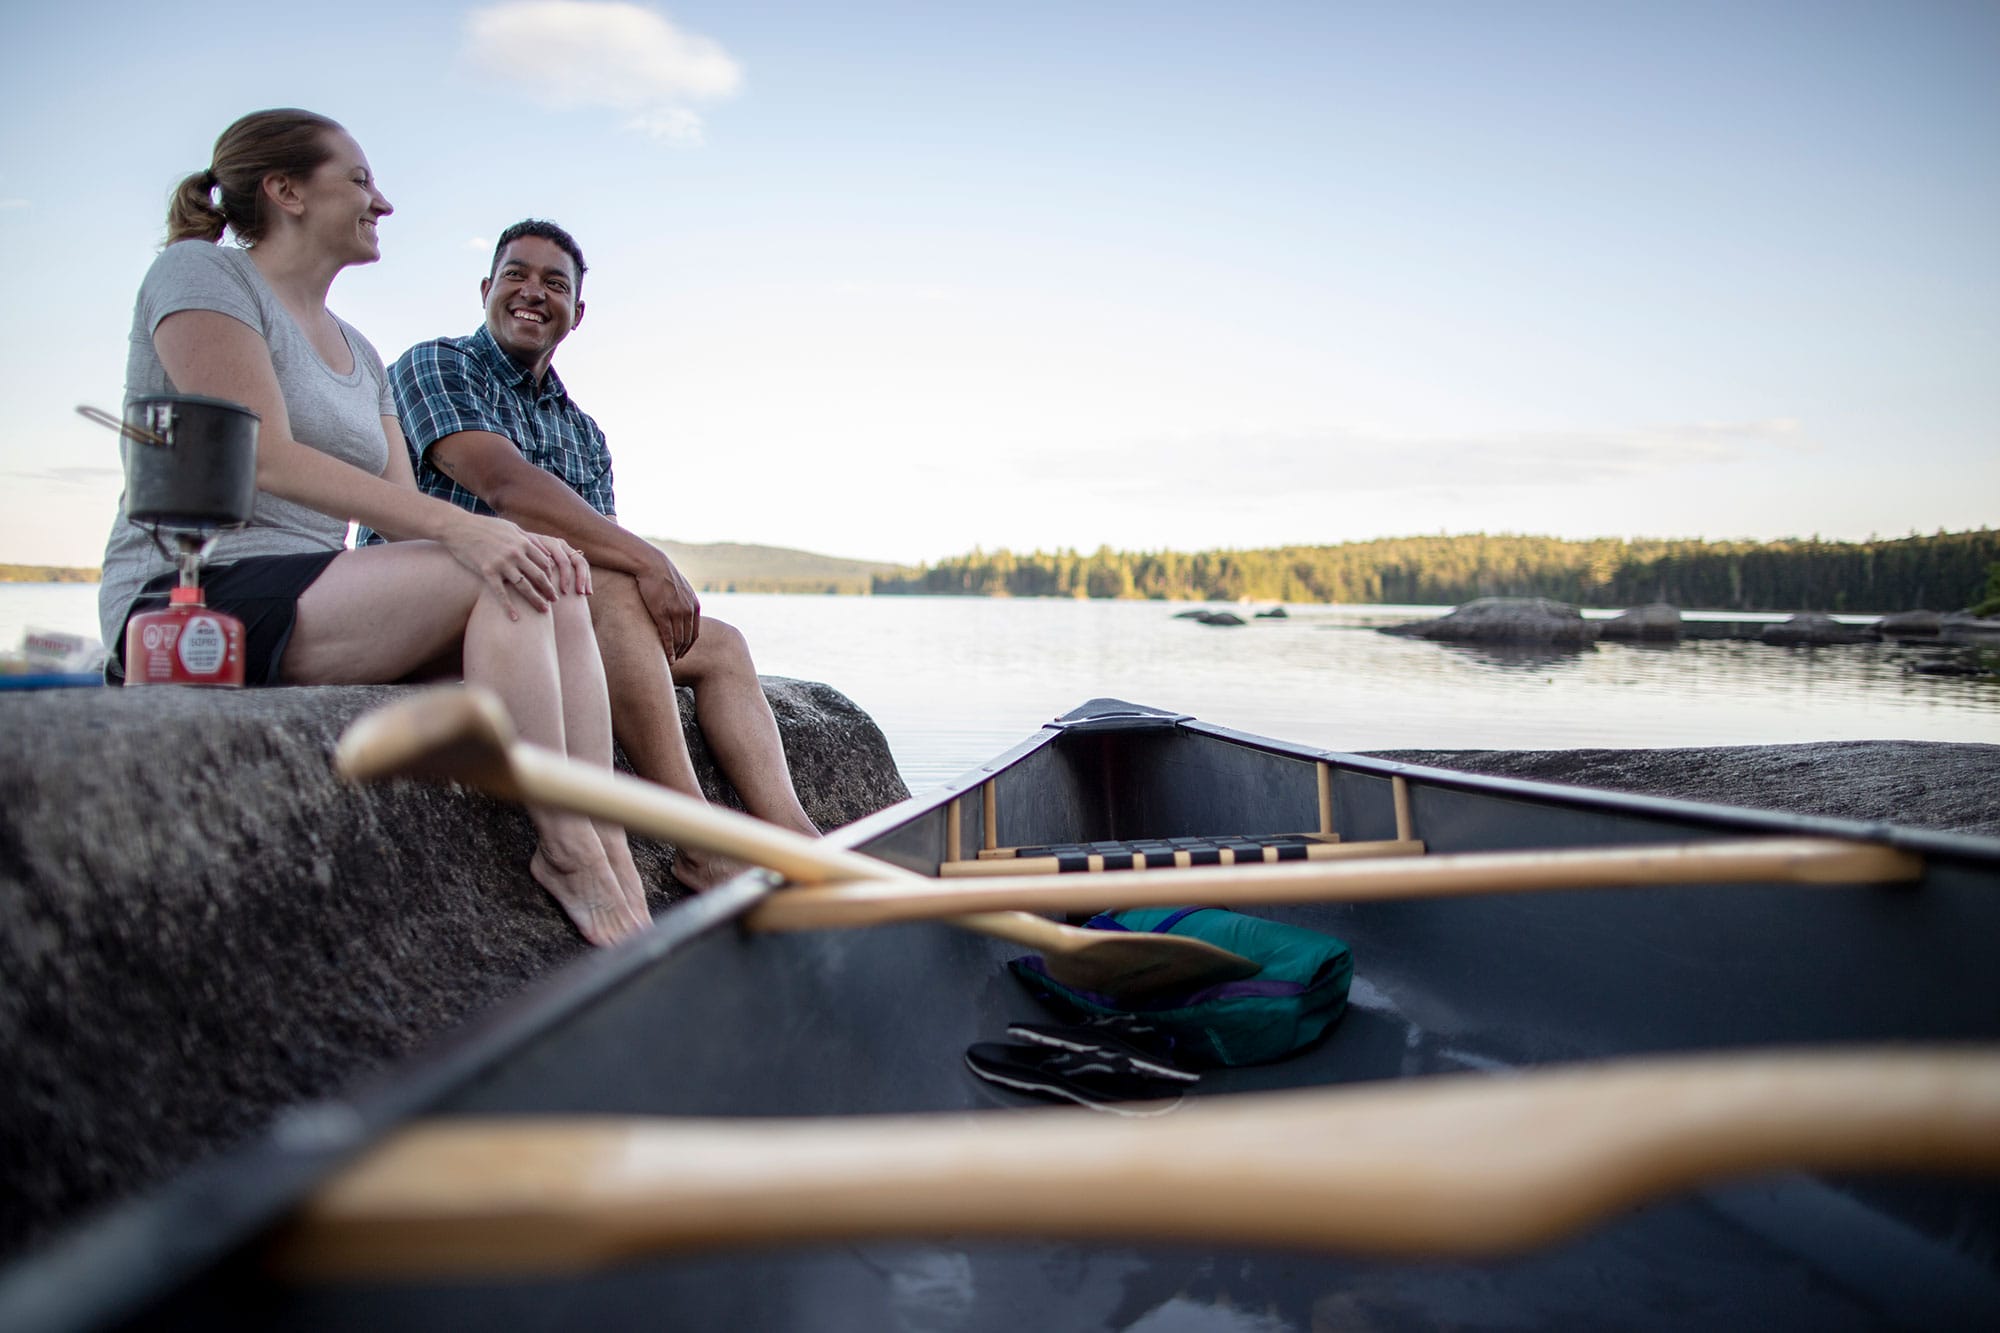 A man and woman sitting in a canoe on a lake.